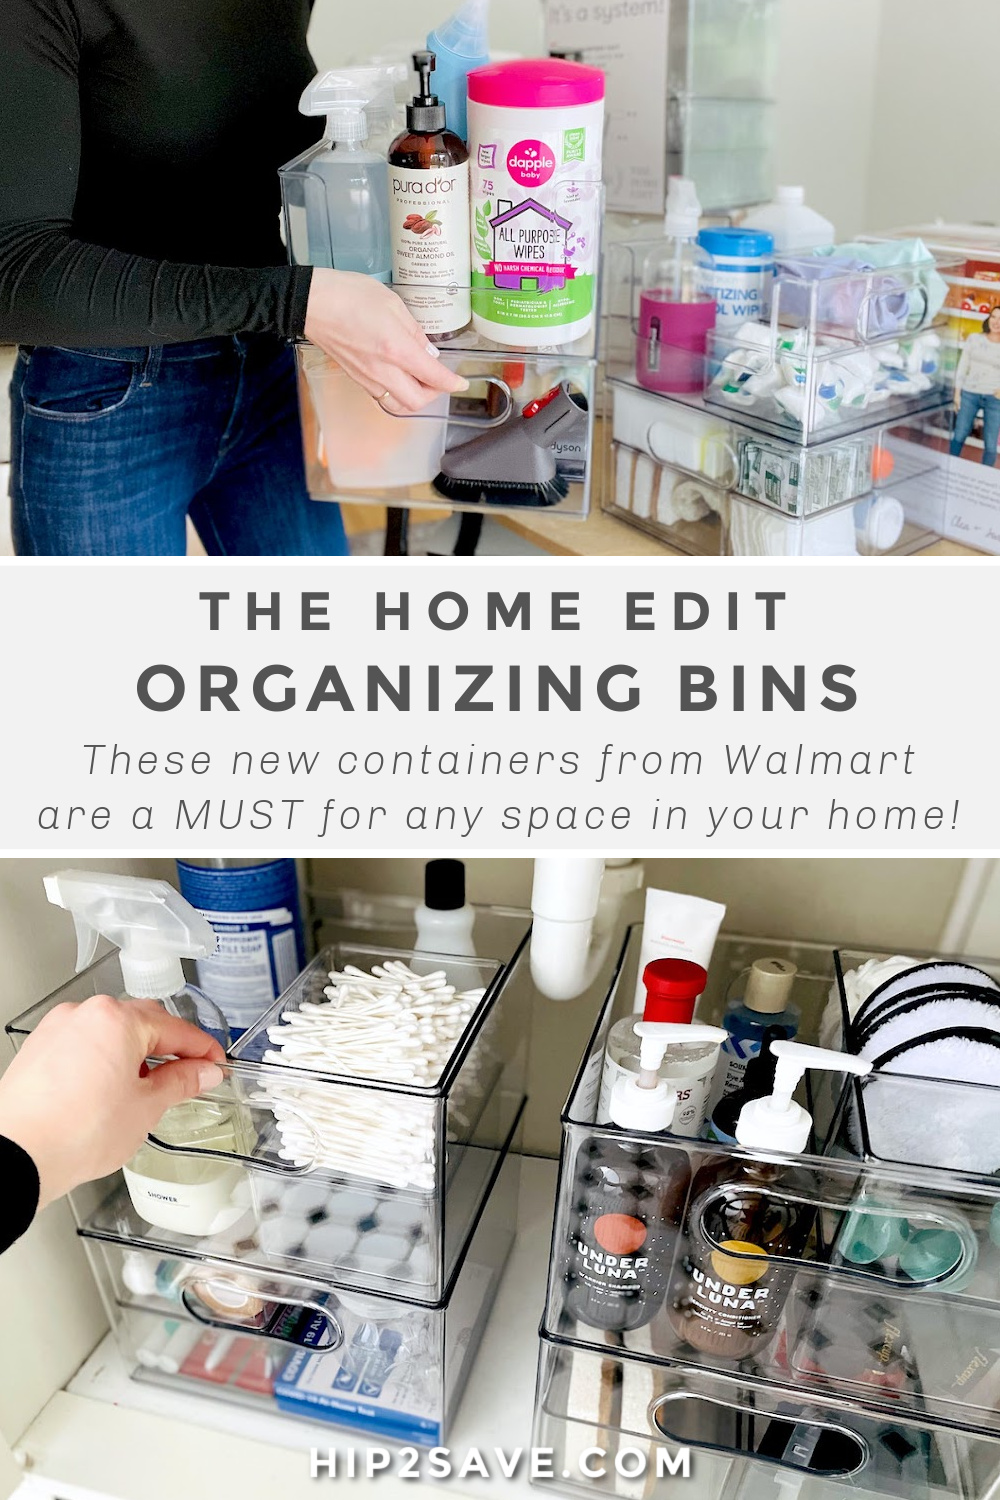 The Home Edit - Under the kitchen sink is *extremely*